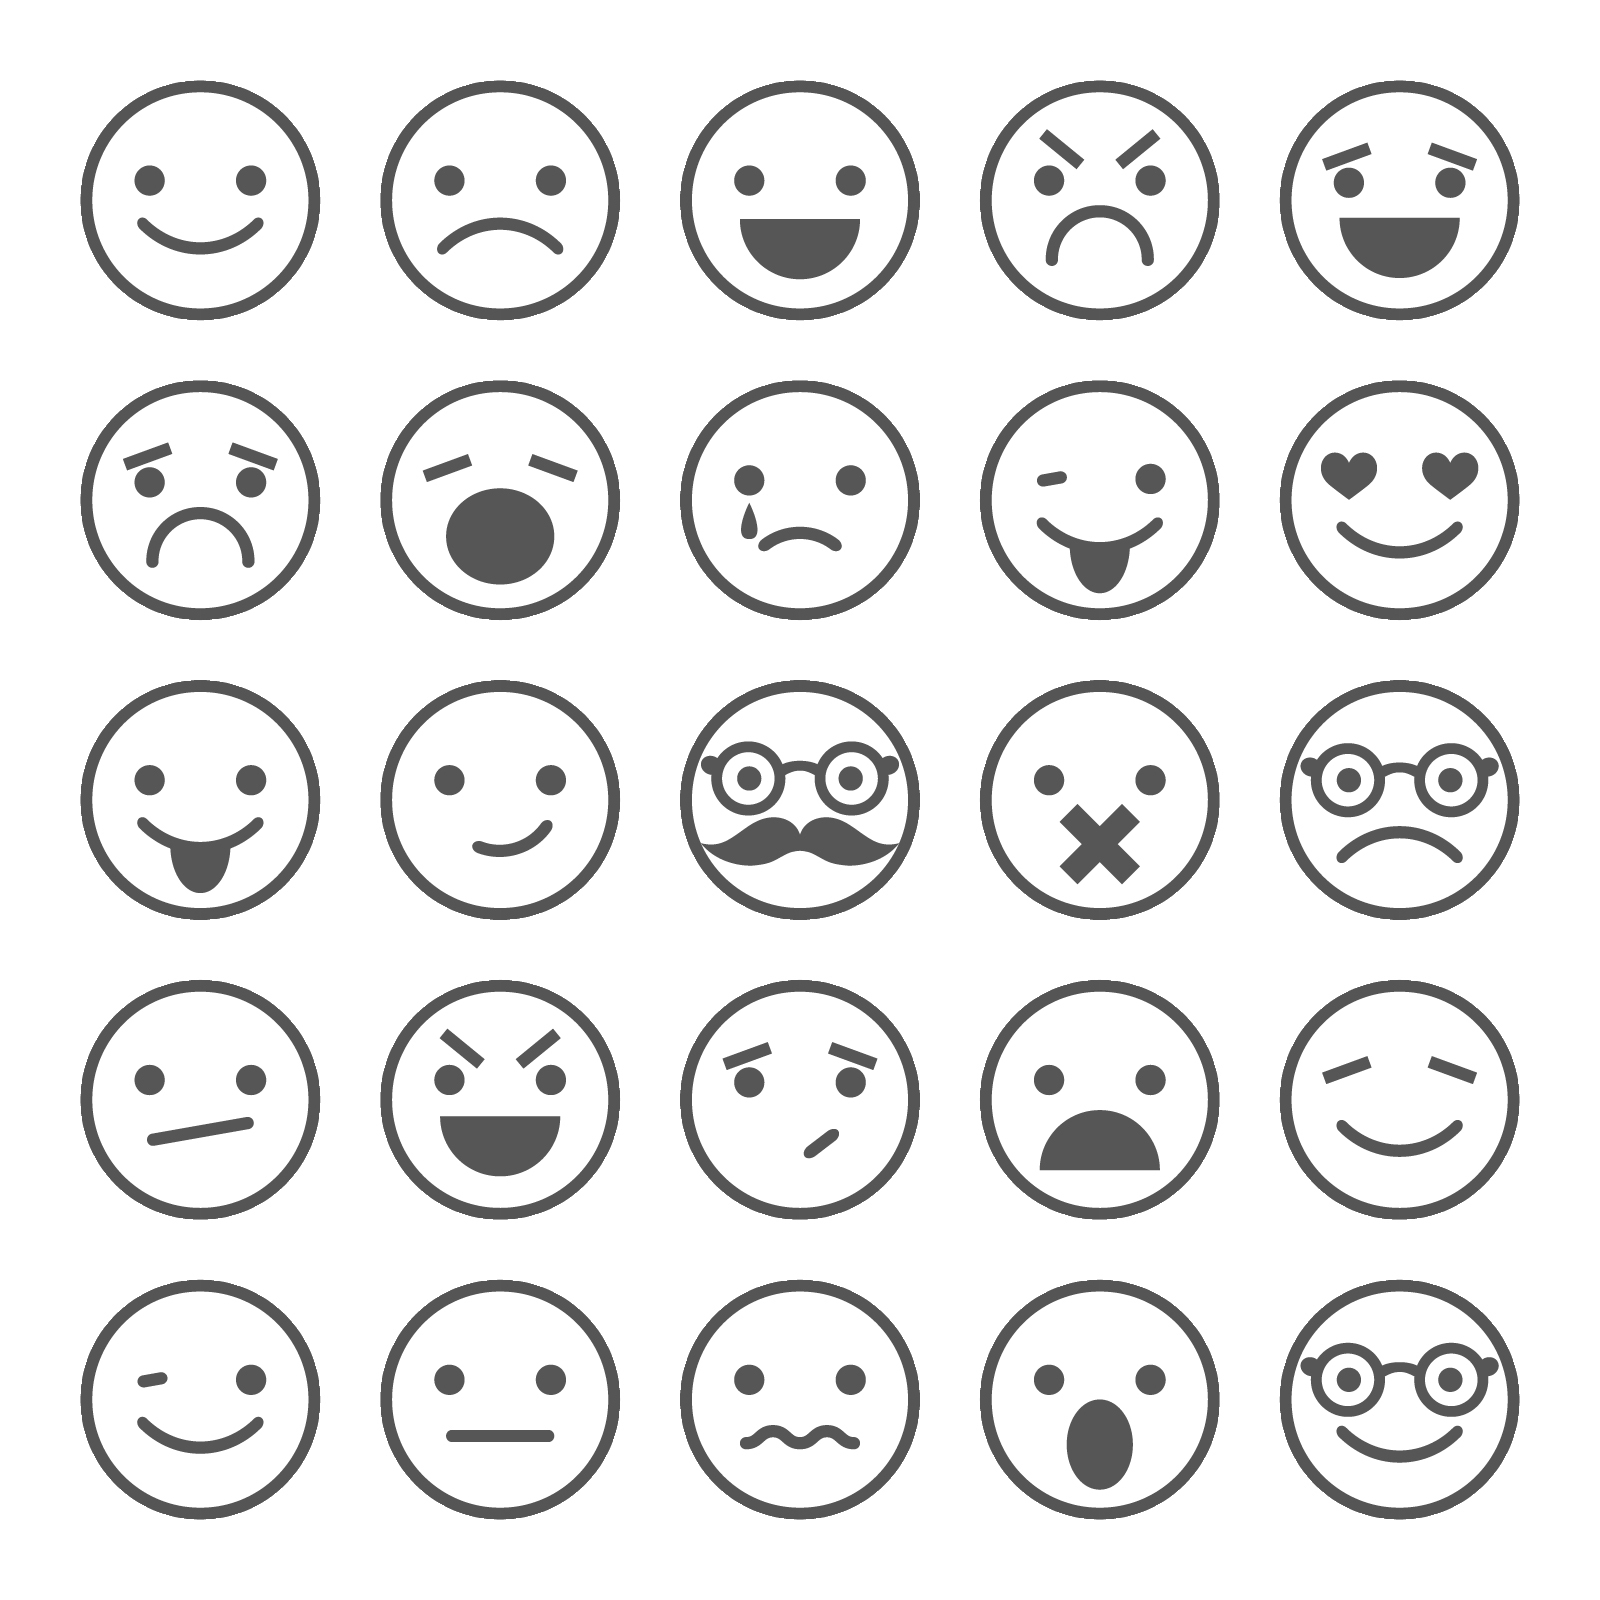 How emoticons can leave you with a sad face. | Cool Beans Creative